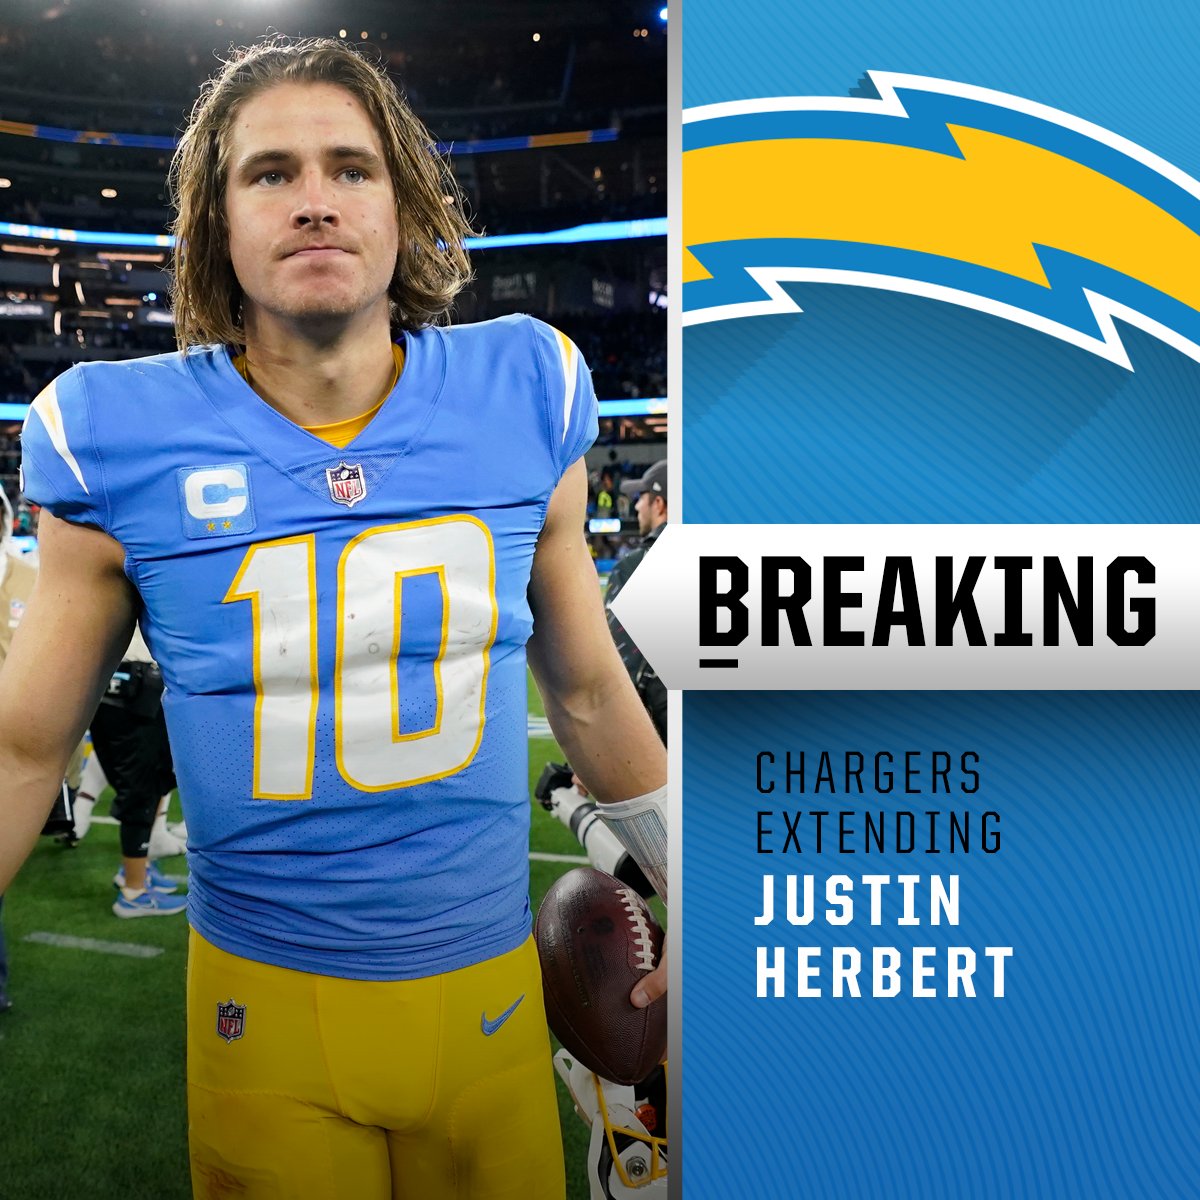 RT @NFL: Chargers, QB Justin Herbert agree to 5-year, $262.5M contract extension. (via @rapsheet, @MikeGarafolo) https://t.co/4hVKe7pANM